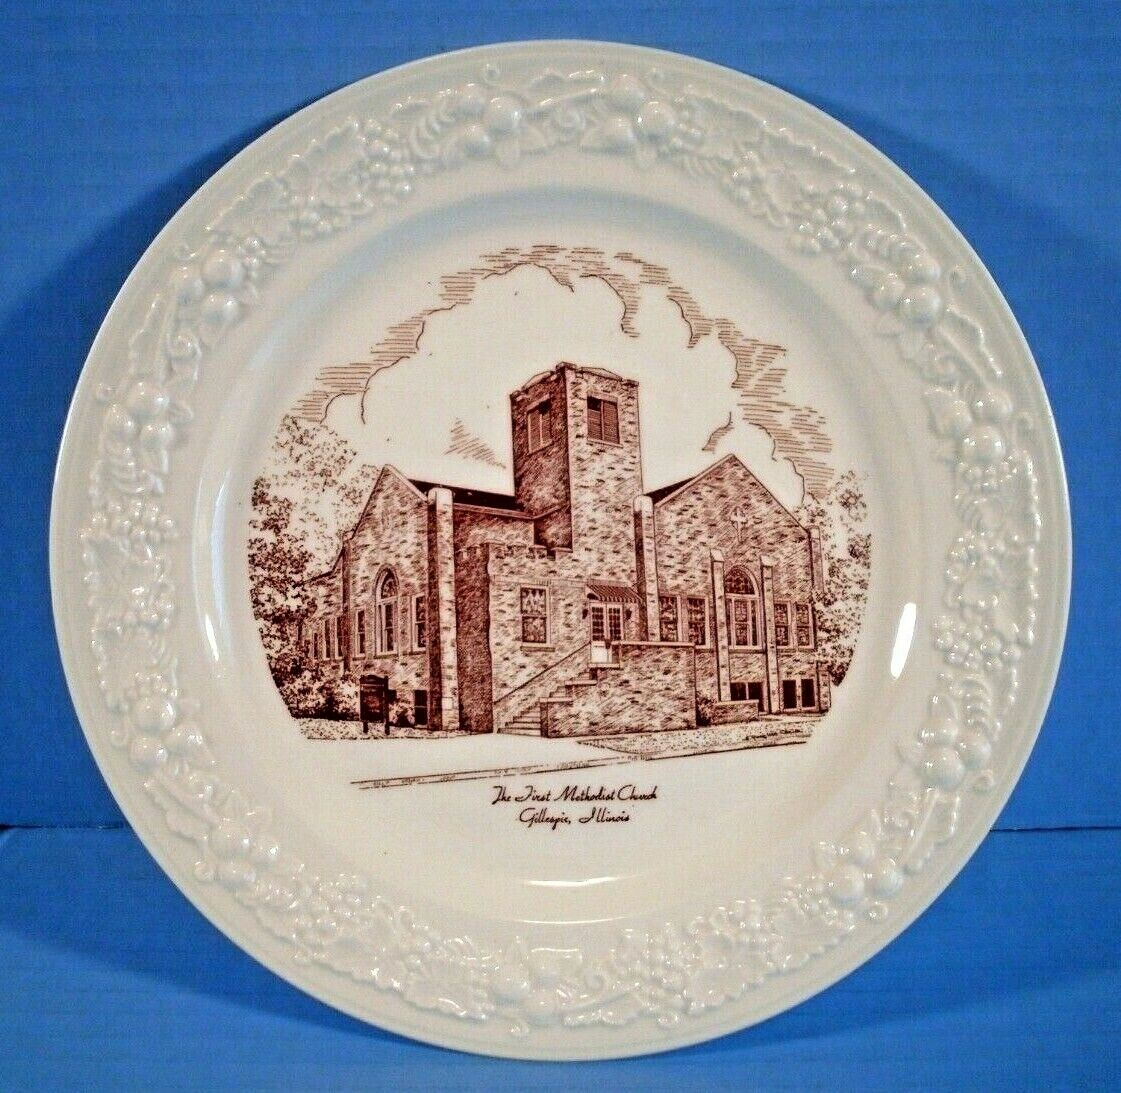 Gillespie Illinois First Methodist Church Collector Plate Homer Laughlin China